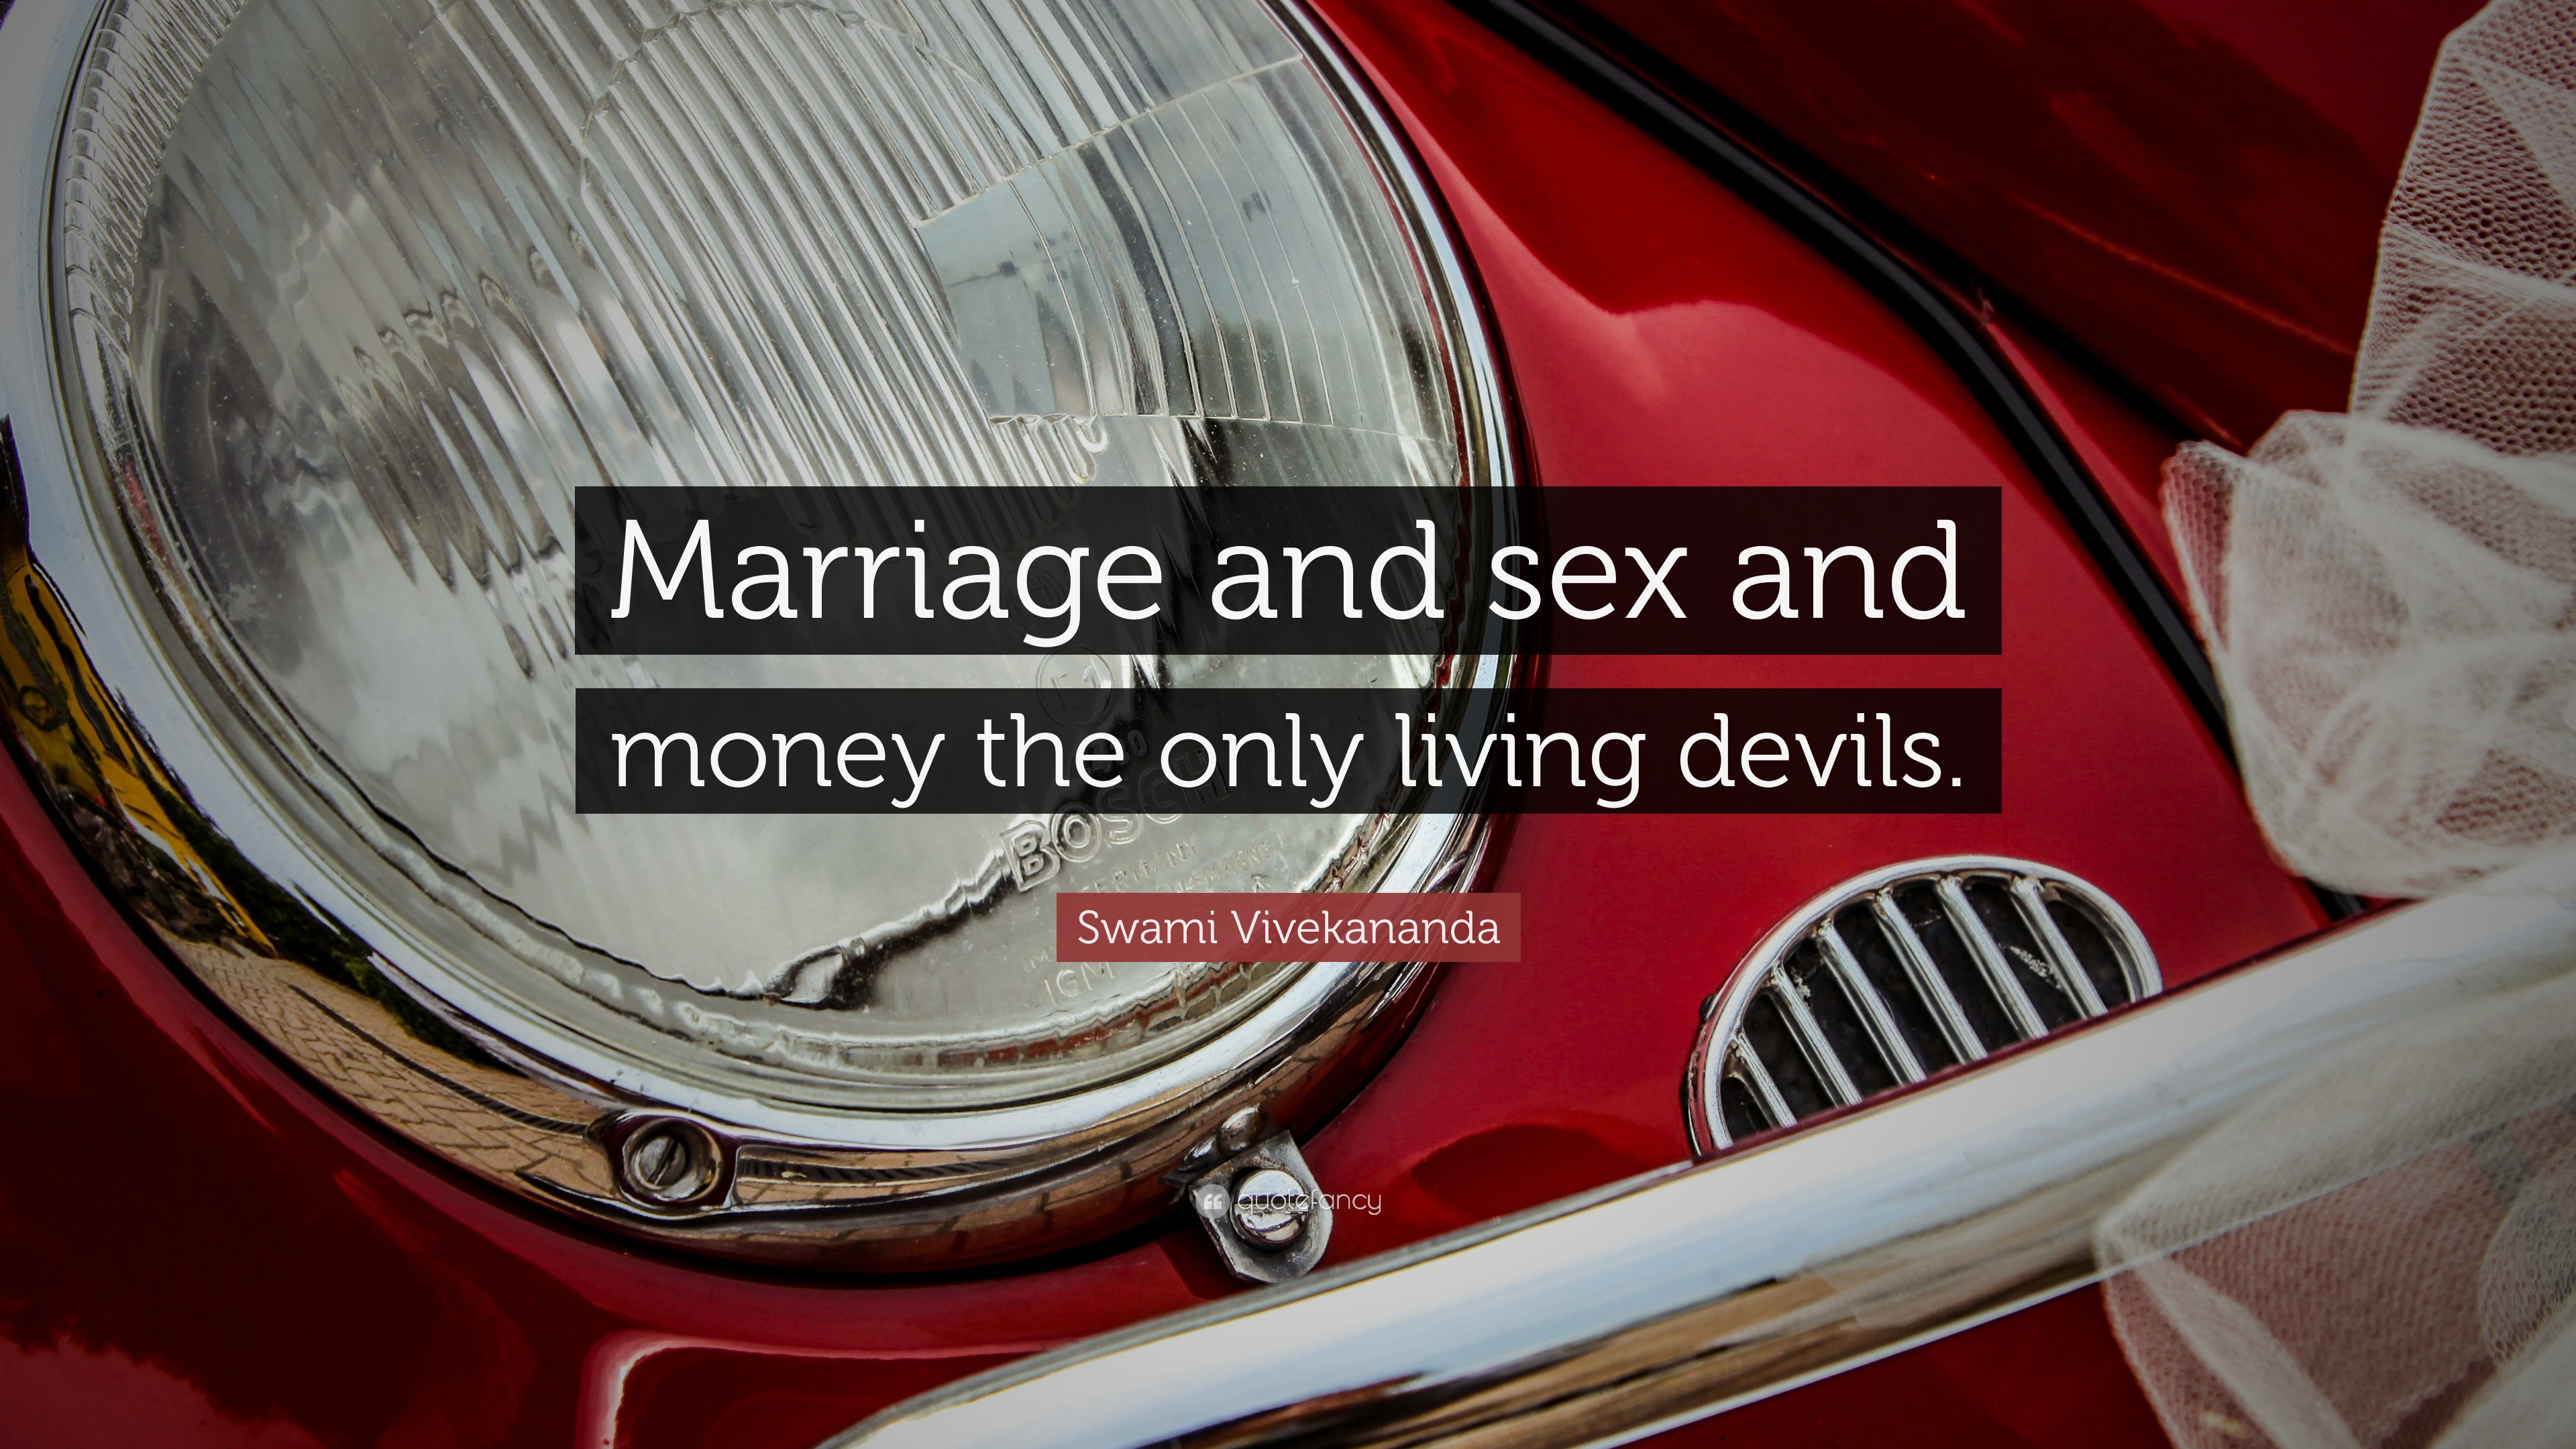 Swami Vivekananda Quote “Marriage and sex and money the only living devils.” pic